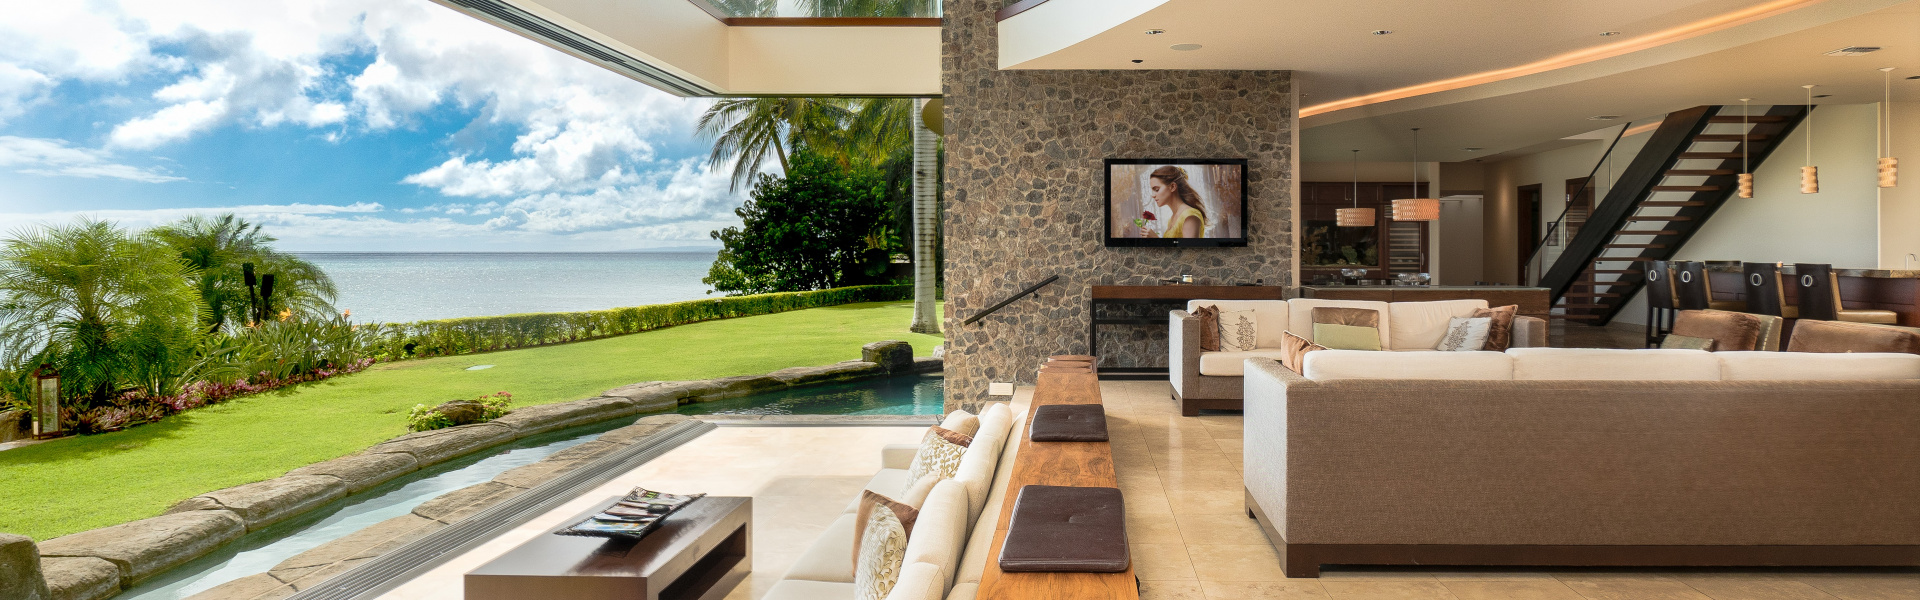 Smart home installation by eDesign Group for Maui